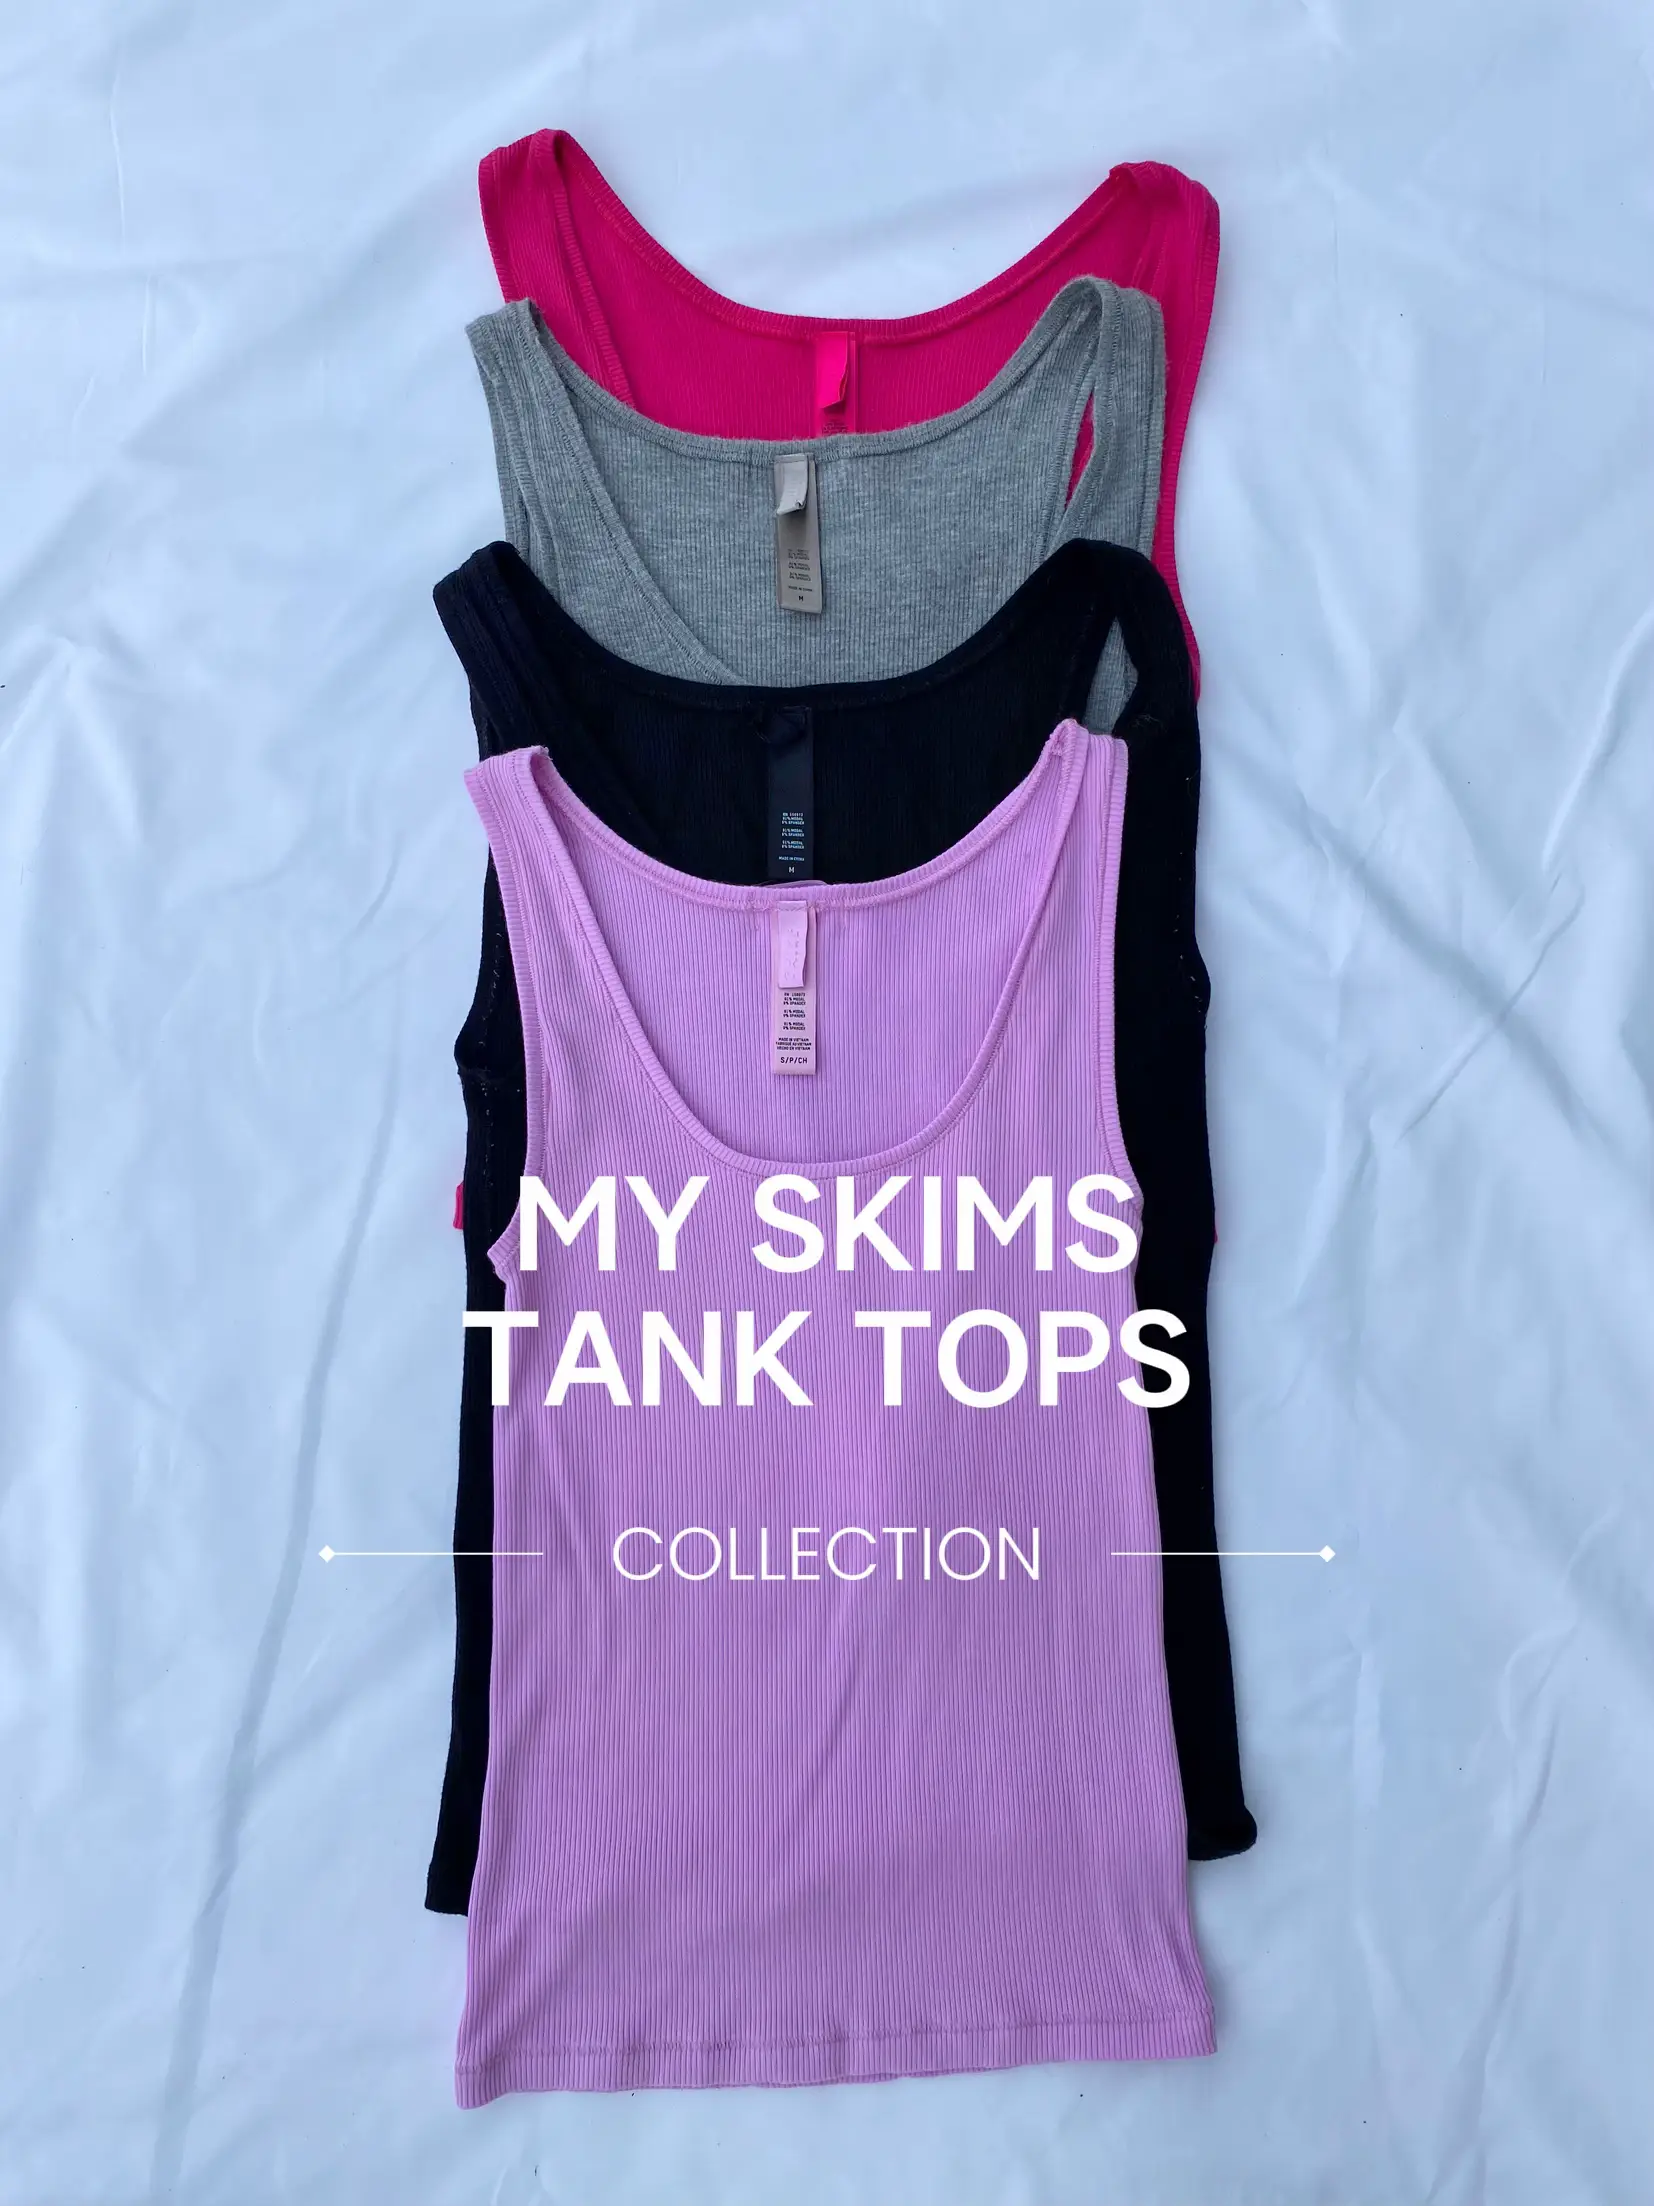 Try-On the Cotton Rib Tanks by @SKIMS with me 🤍 #skims